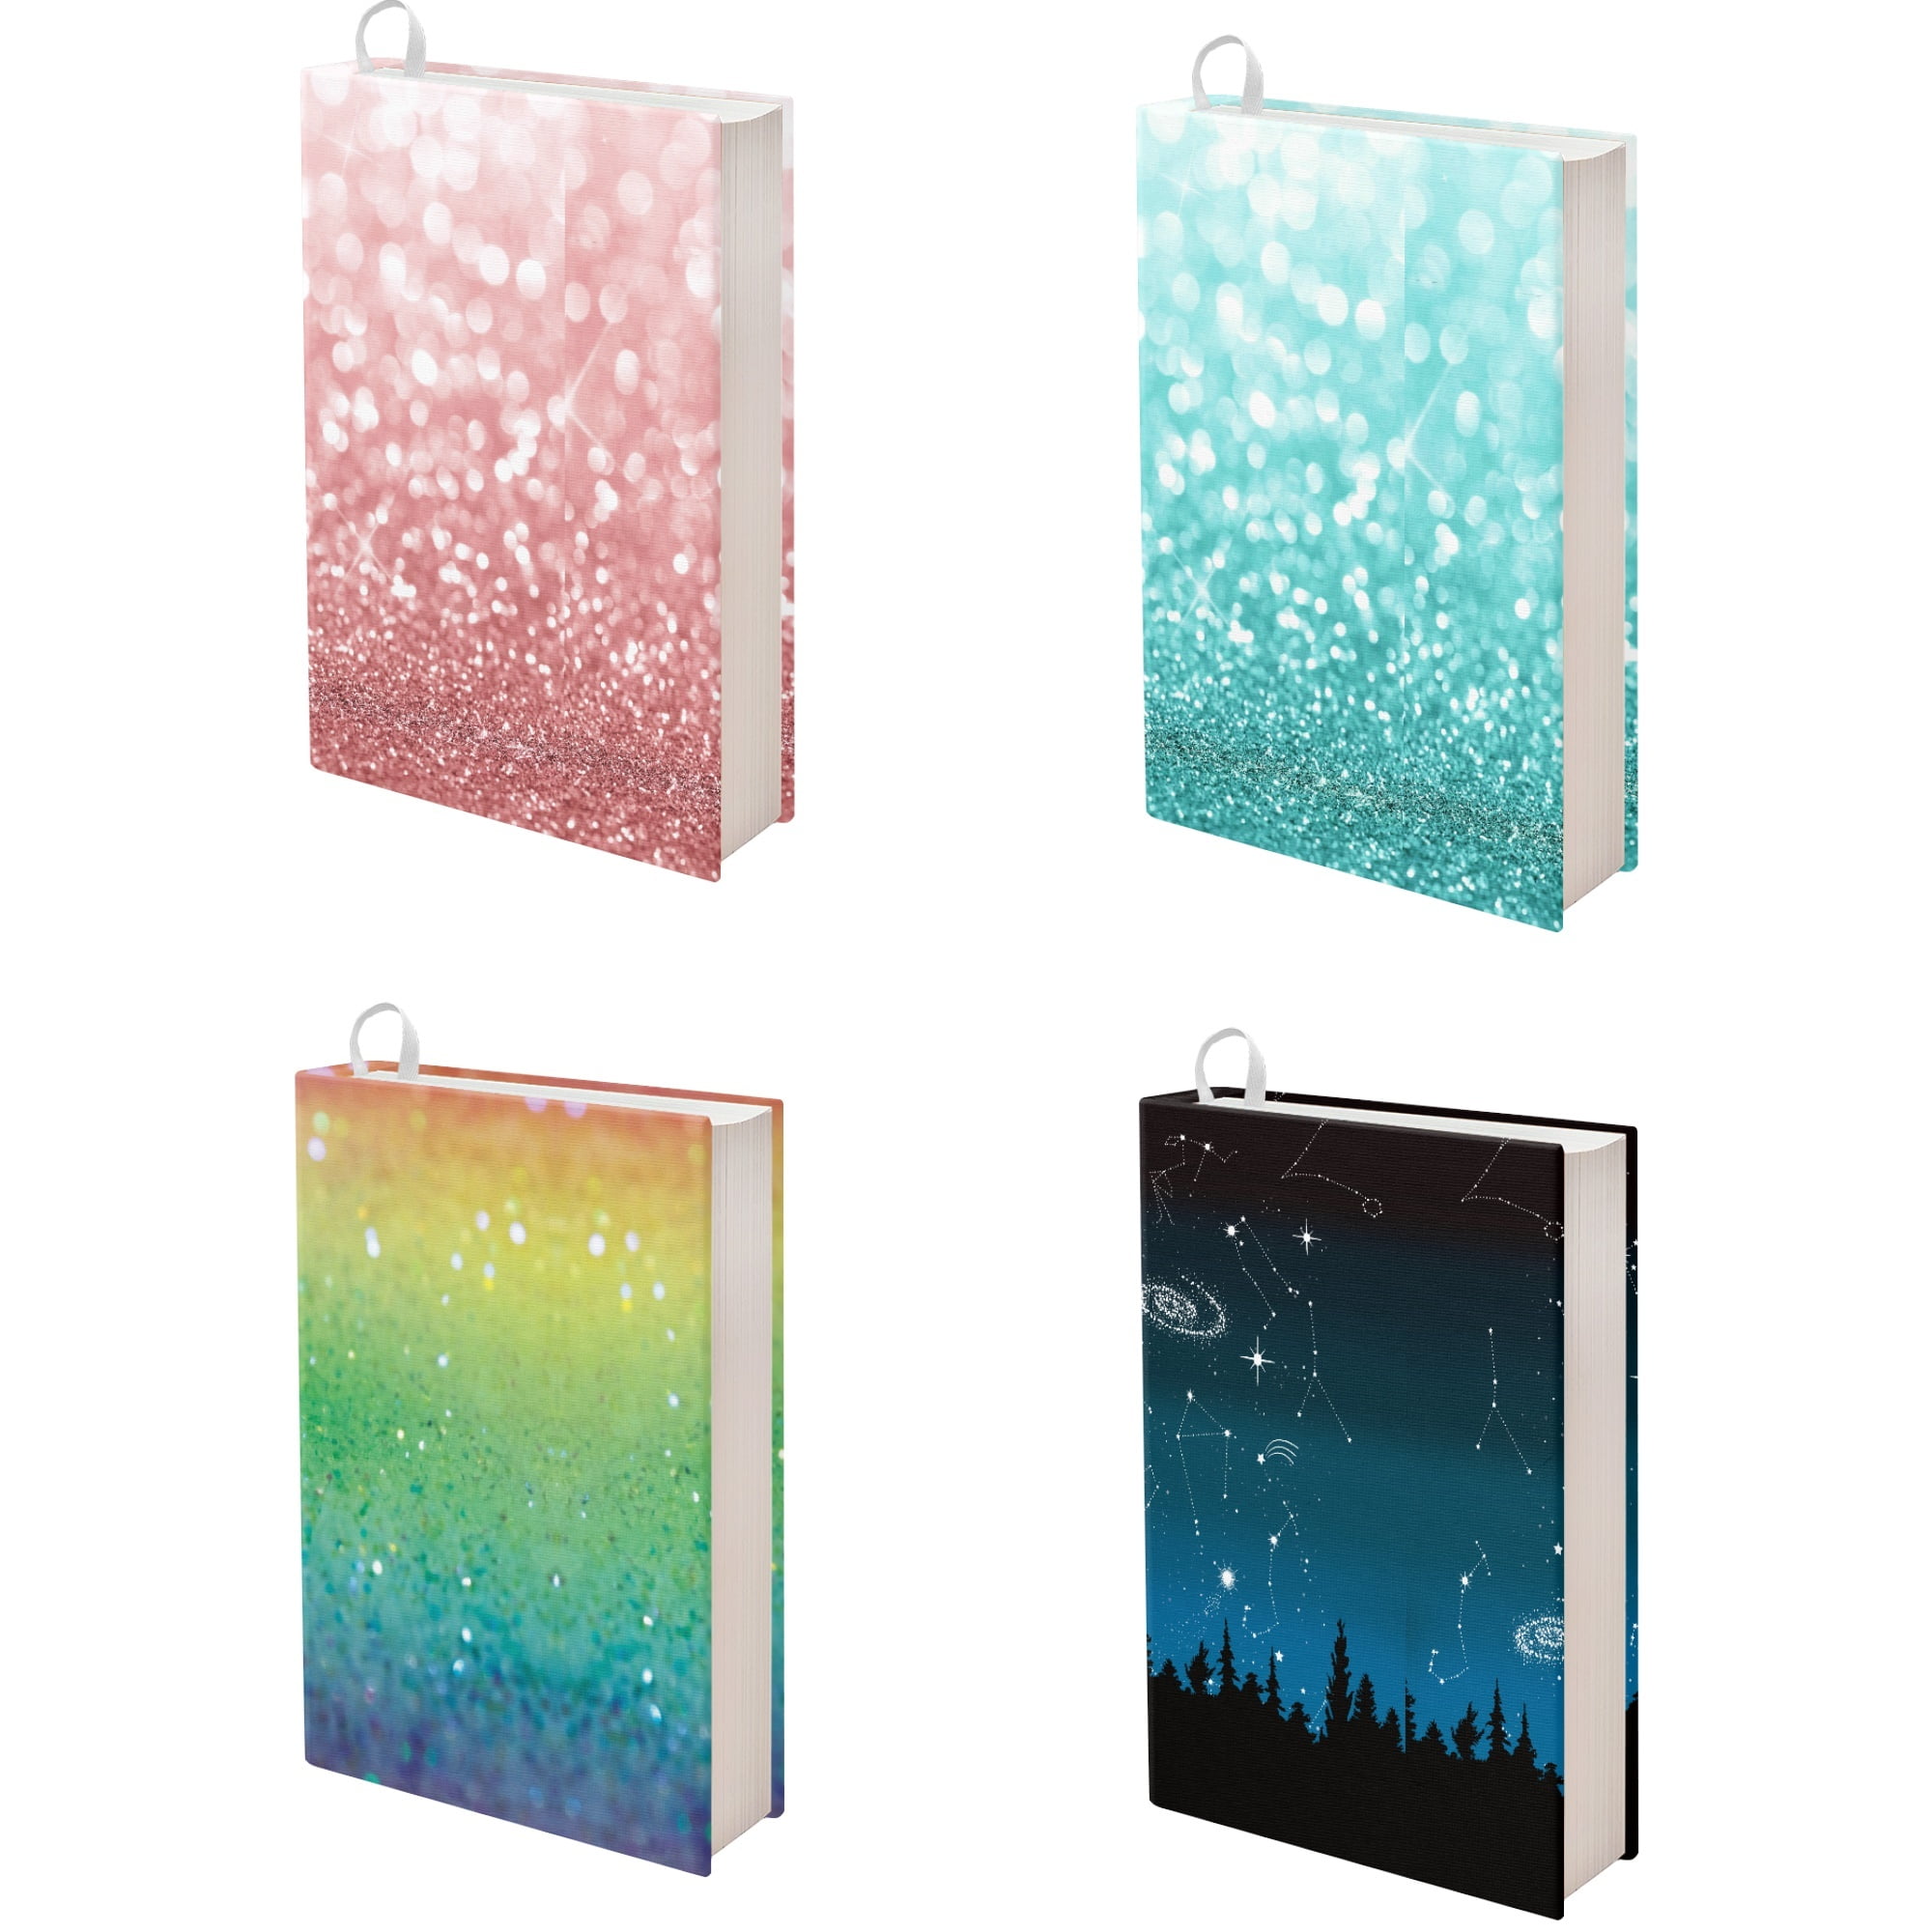 Zocavia Starry Sky Bling Book Sleeve Cover Reusable Protective Cover for School Books Jumbo Stretchable Book Cover 3 Pack, Size: 9-11inch Book Cover